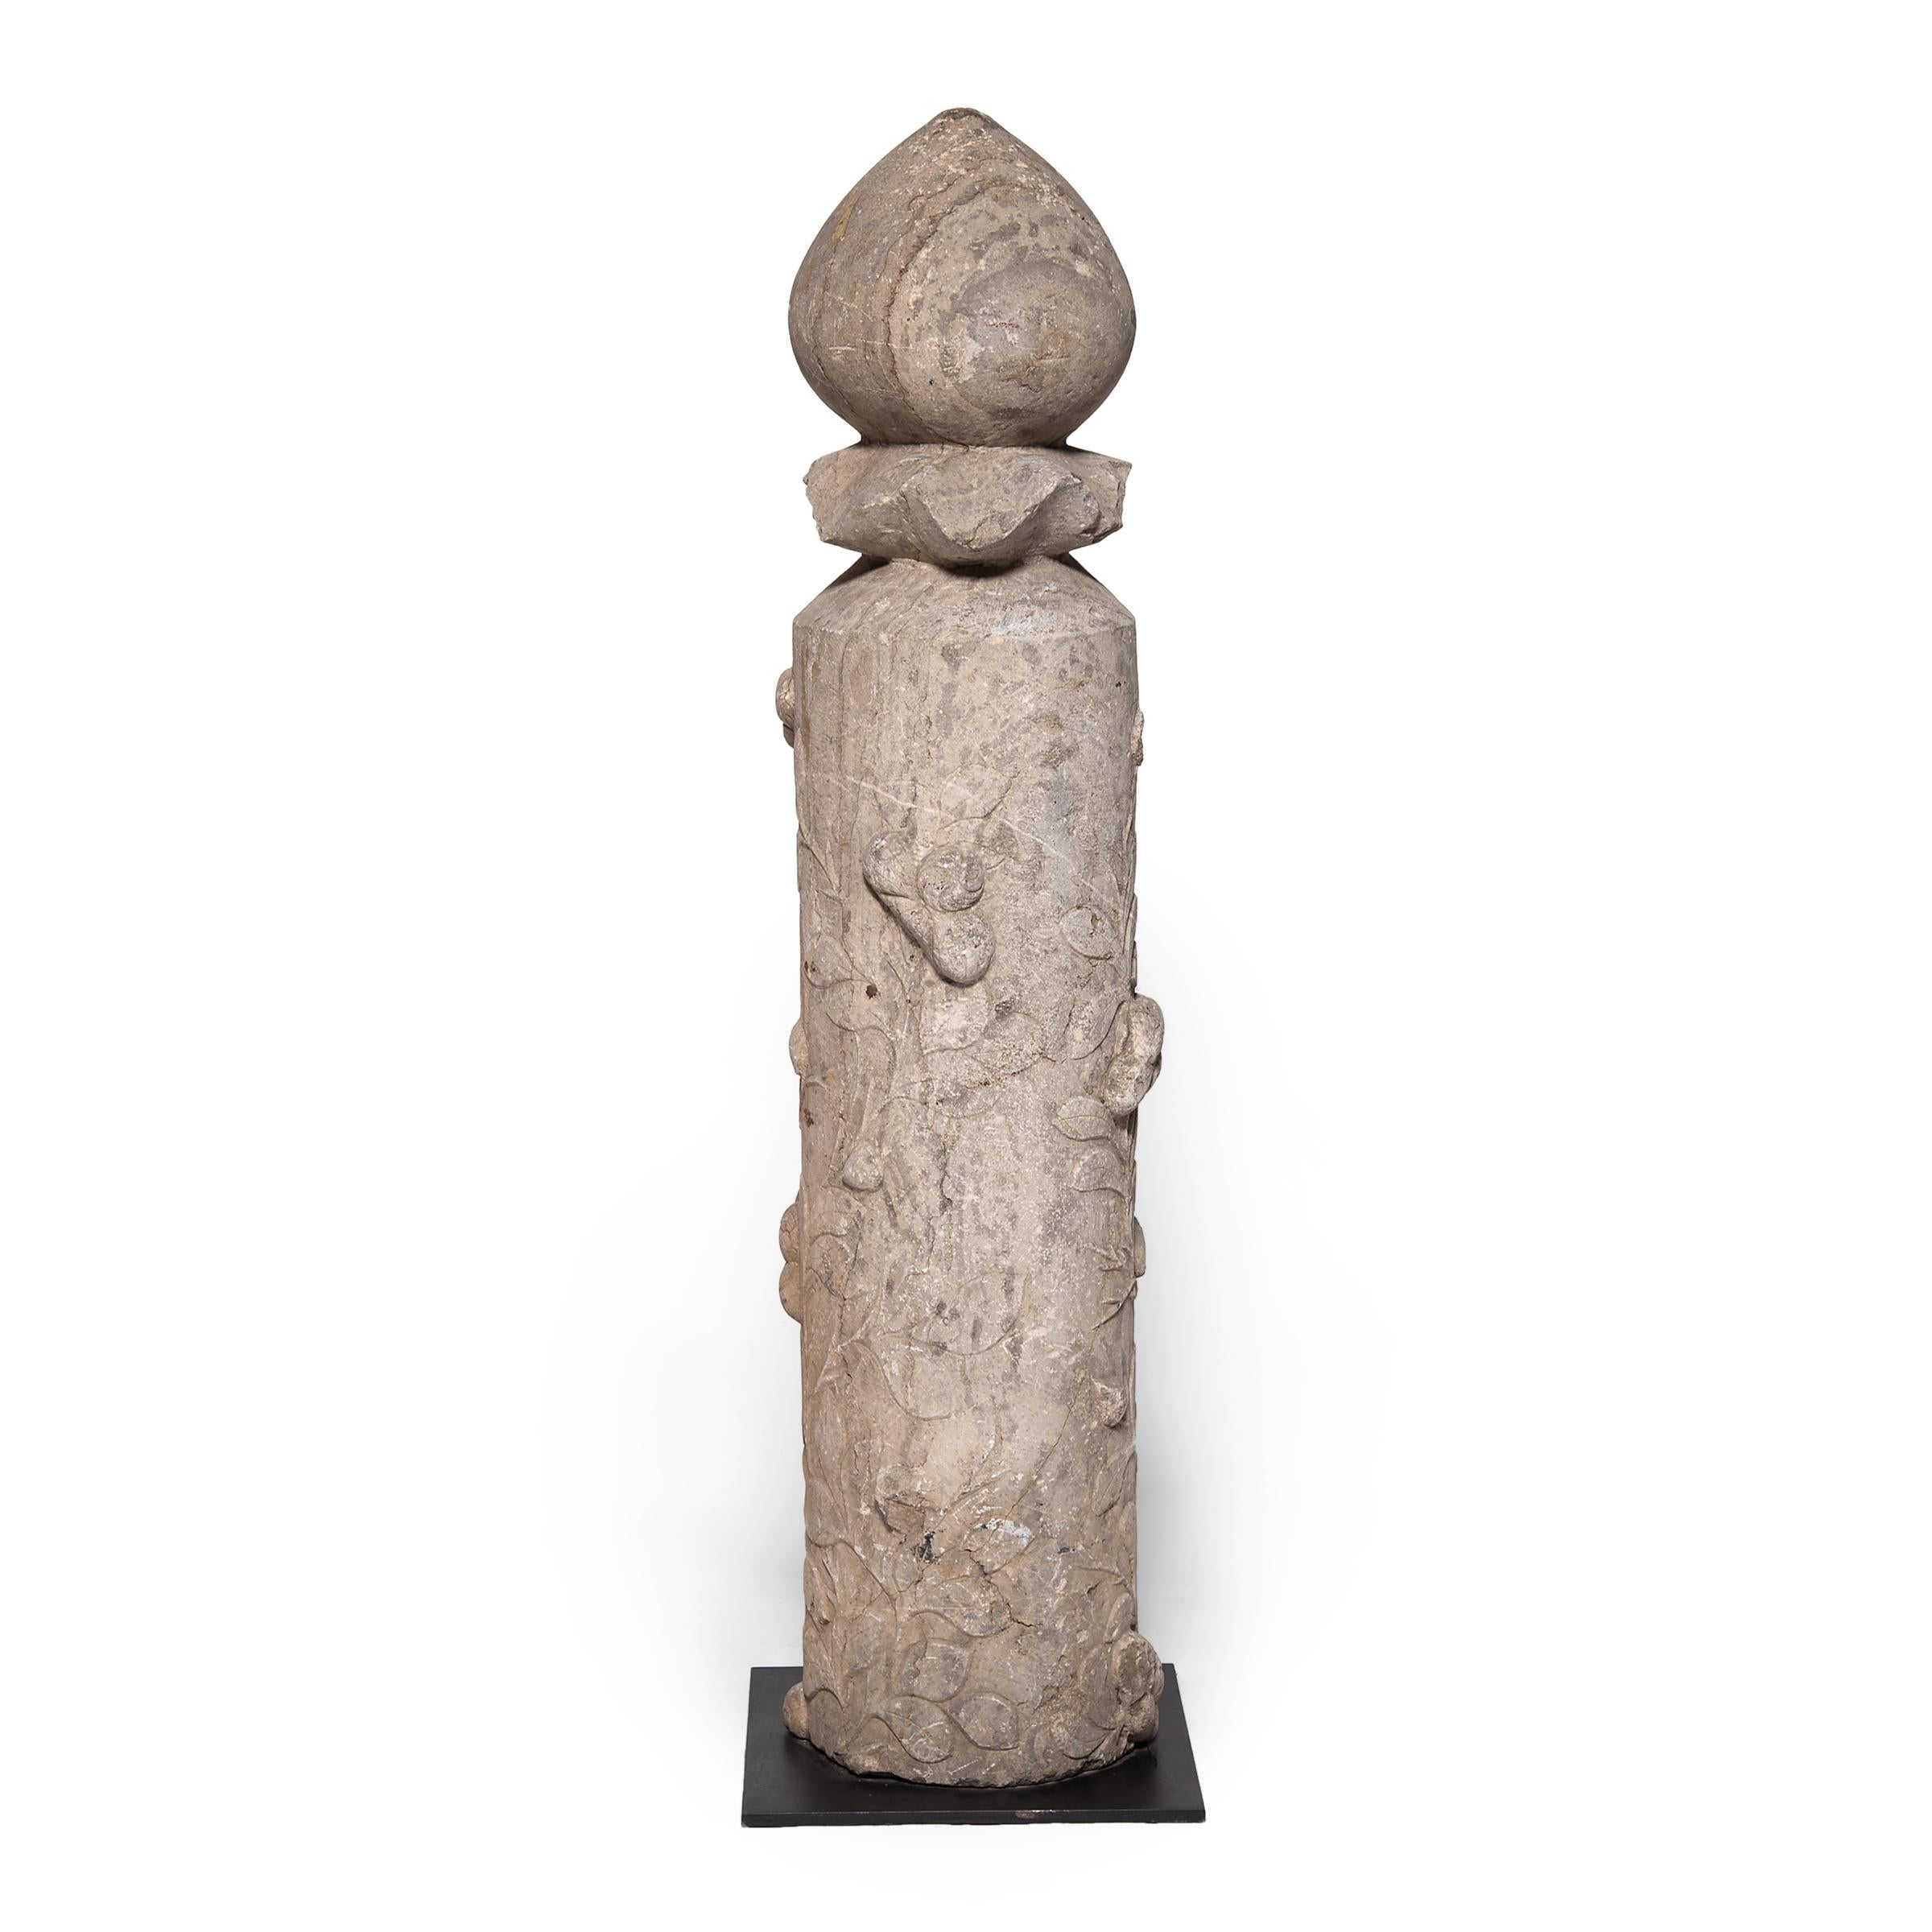 This sculptural stone post was hand-carved in the 18th-century from a solid block of limestone. The column is crowned with a lotus bud - a symbol of purity and perfection. Trailing vines carved in low relief wrap around the base, dotted with raised